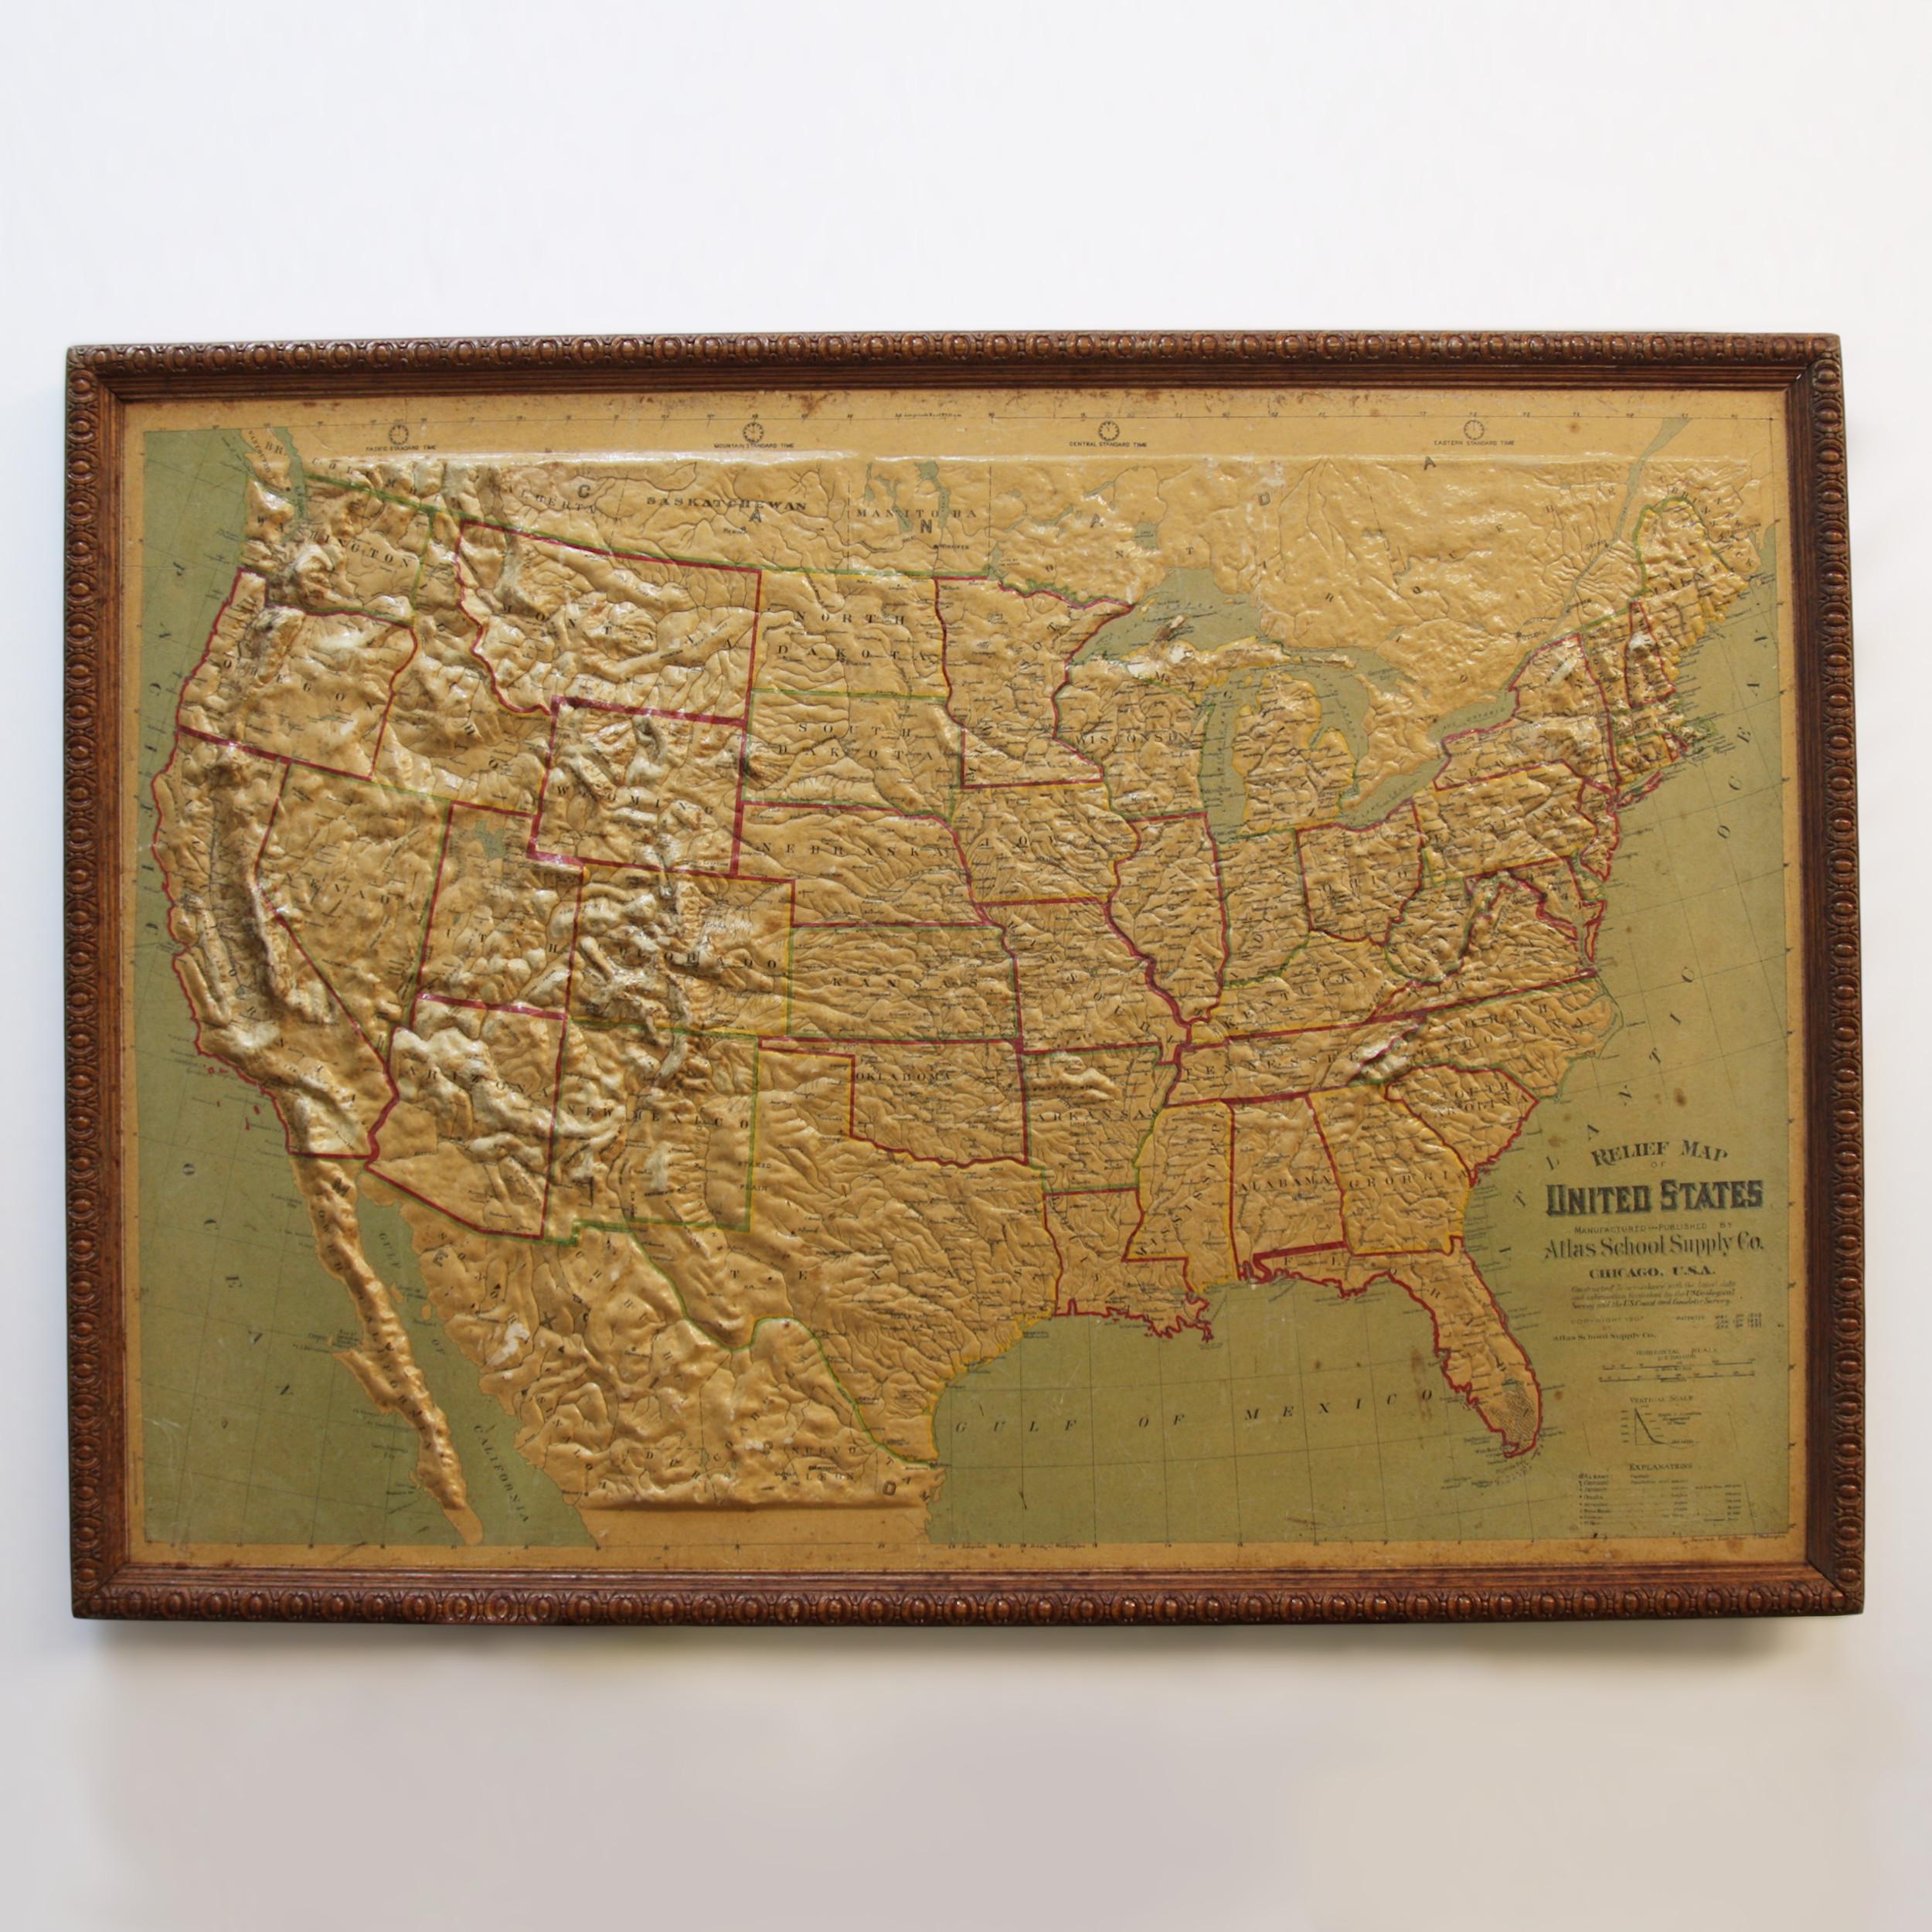 Remarkably original, 1907 Relief map of the United States by the Atlas School Supply Co. of Chicago, Illinois. This exceptional quality map features its original oak frame, heavy-duty stretcher, bold graphics and beautifully molded 3-D Papier-mâché